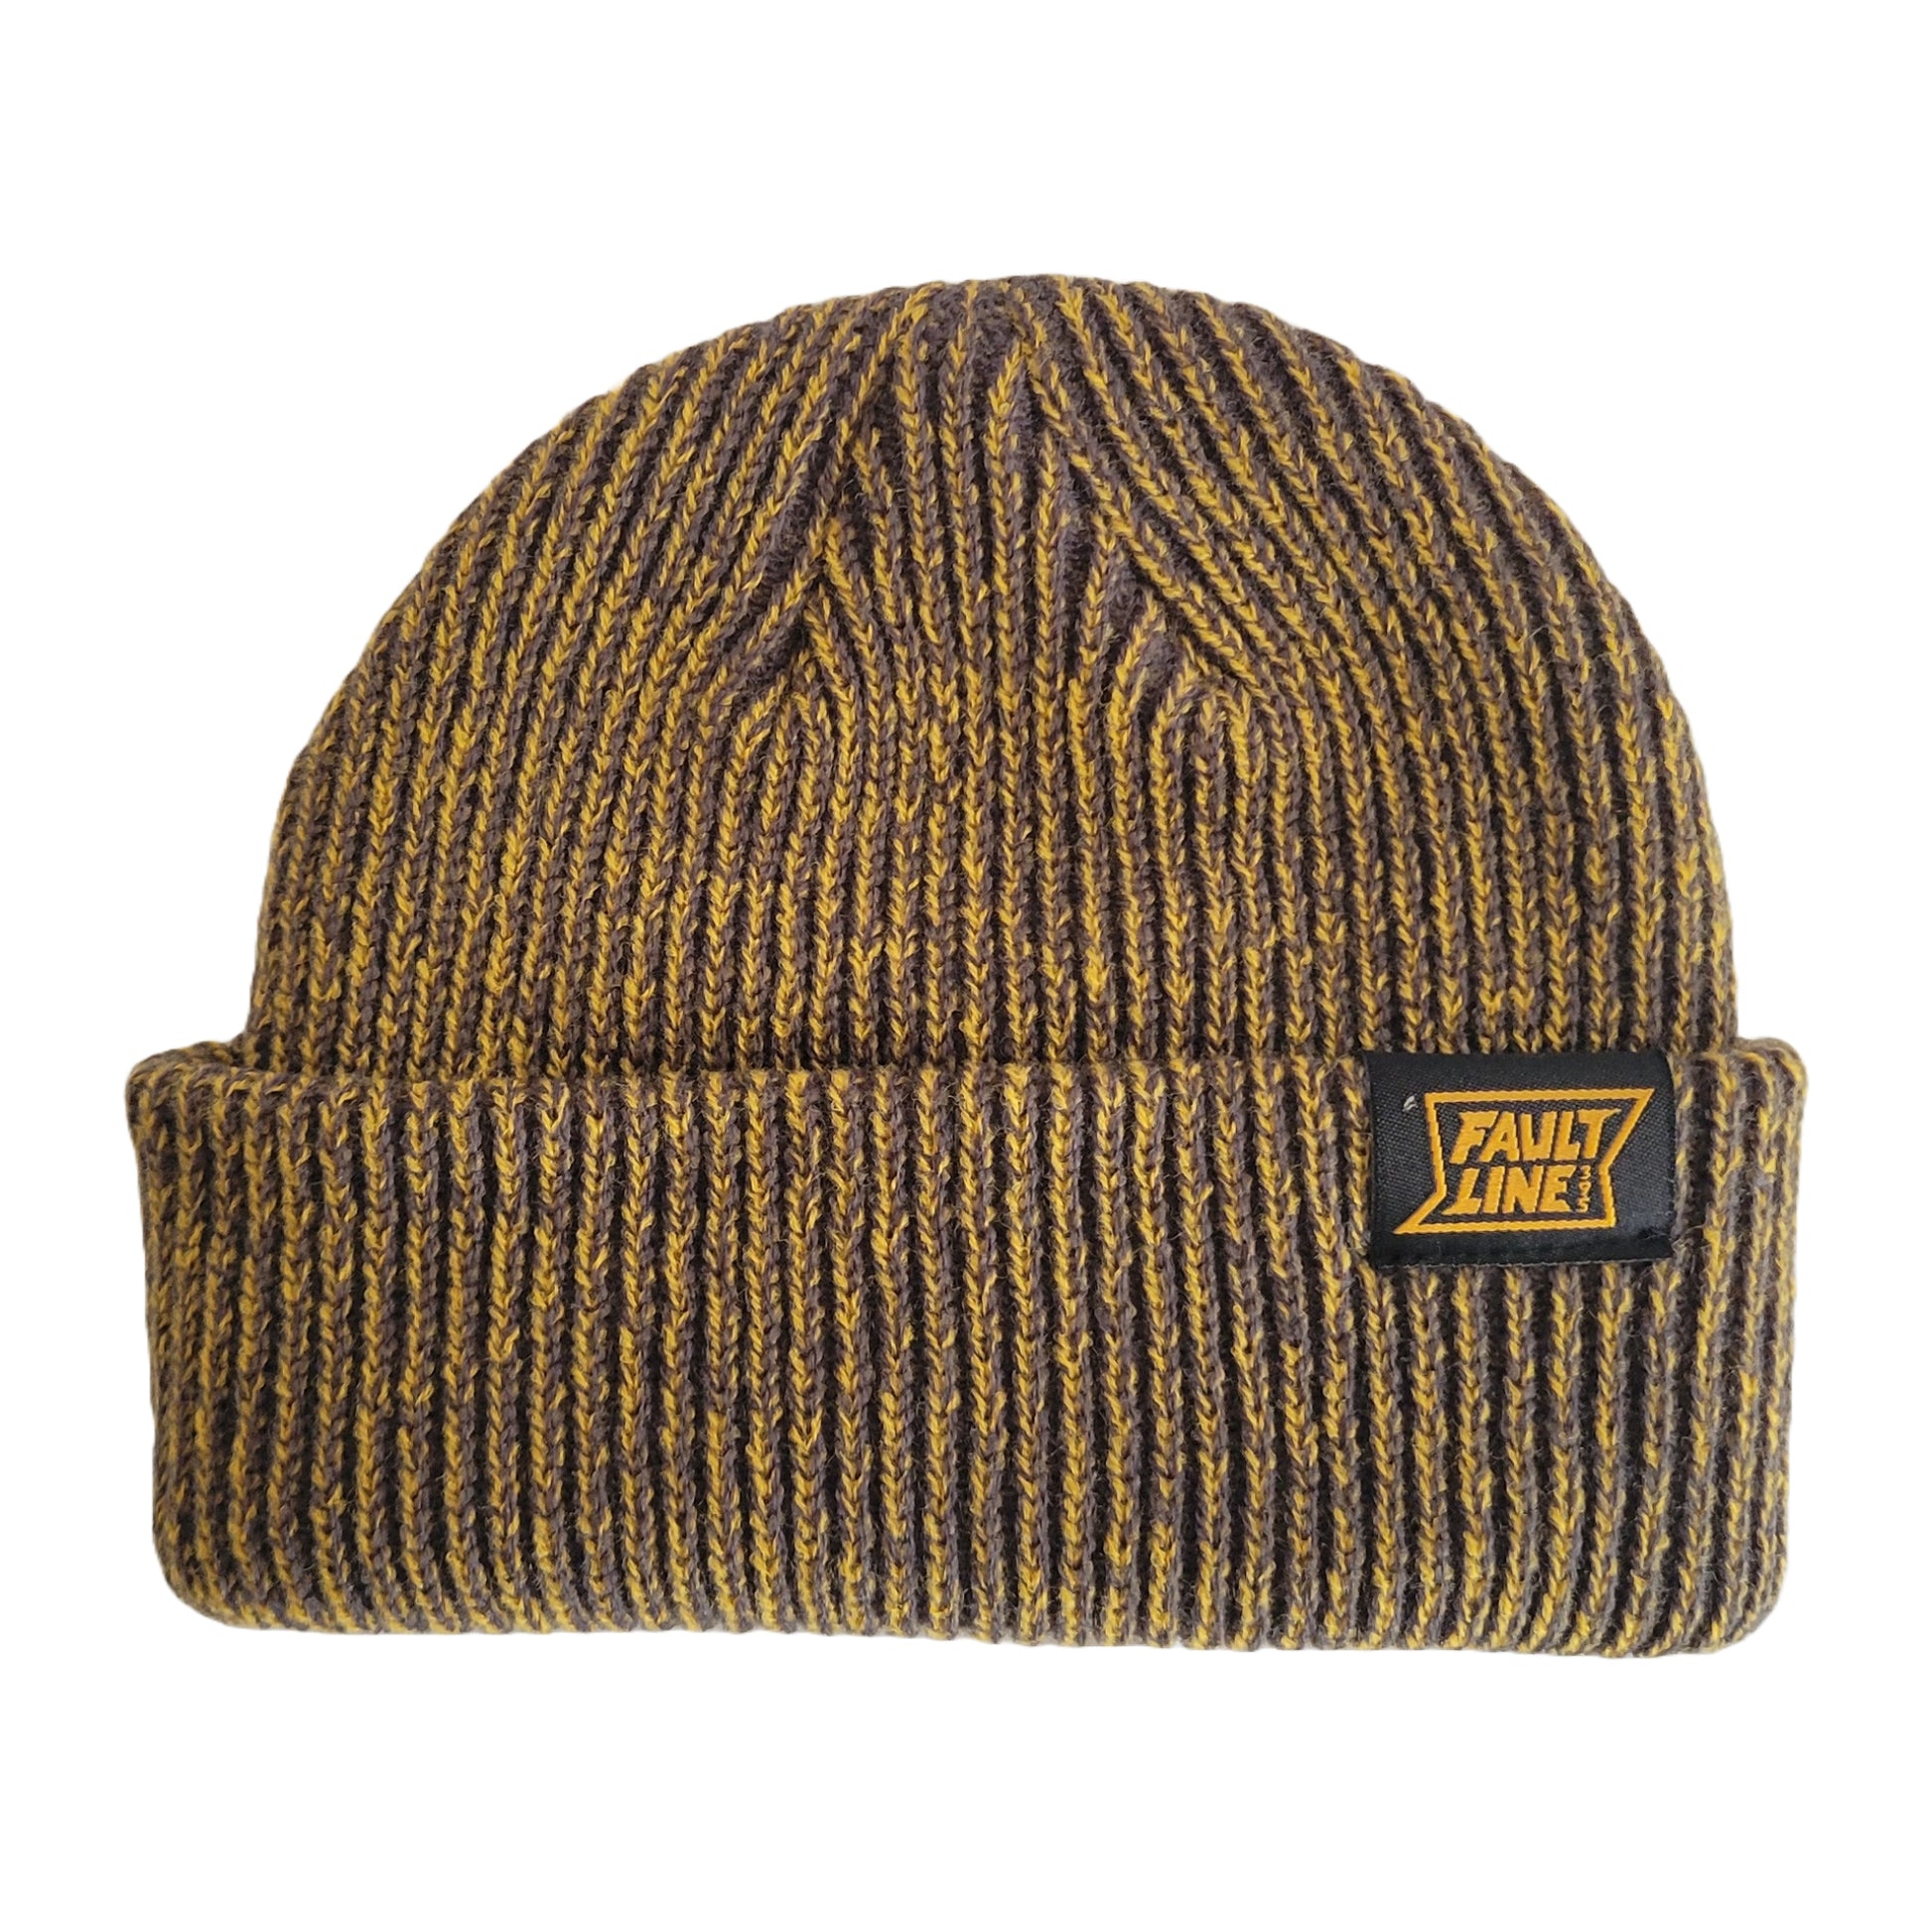 – | Charcoal/Gold Broadway - Faultline395 Beanie FaultLine395